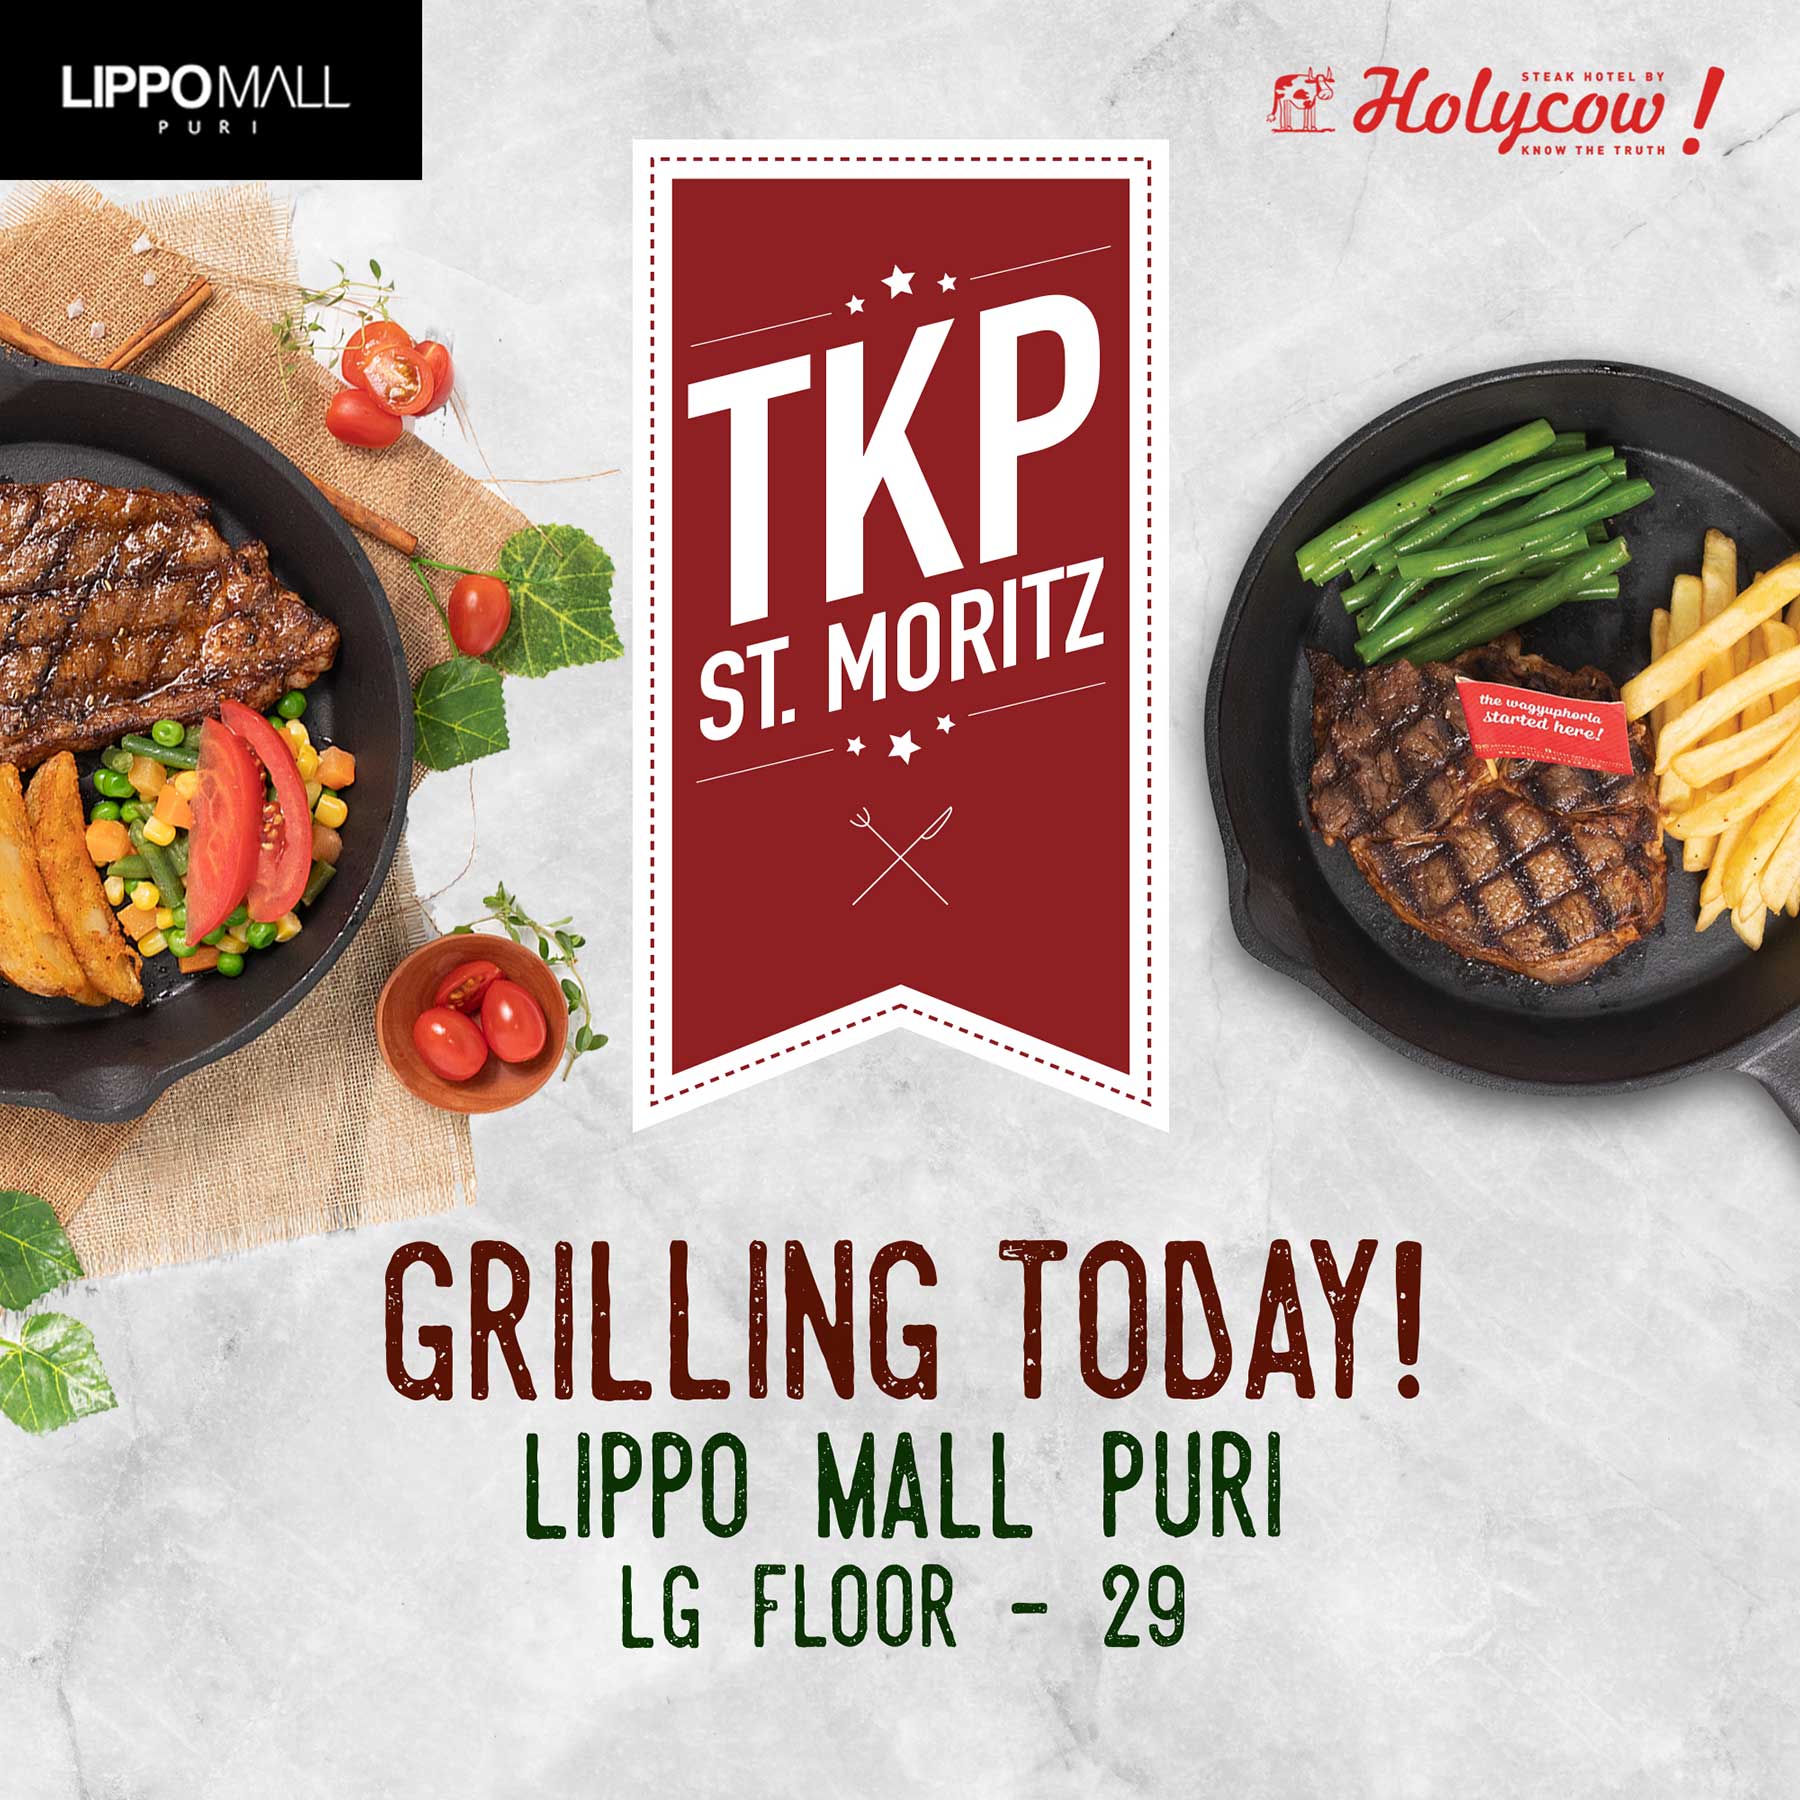 Holycow now open in lippo mall puri st. moritz